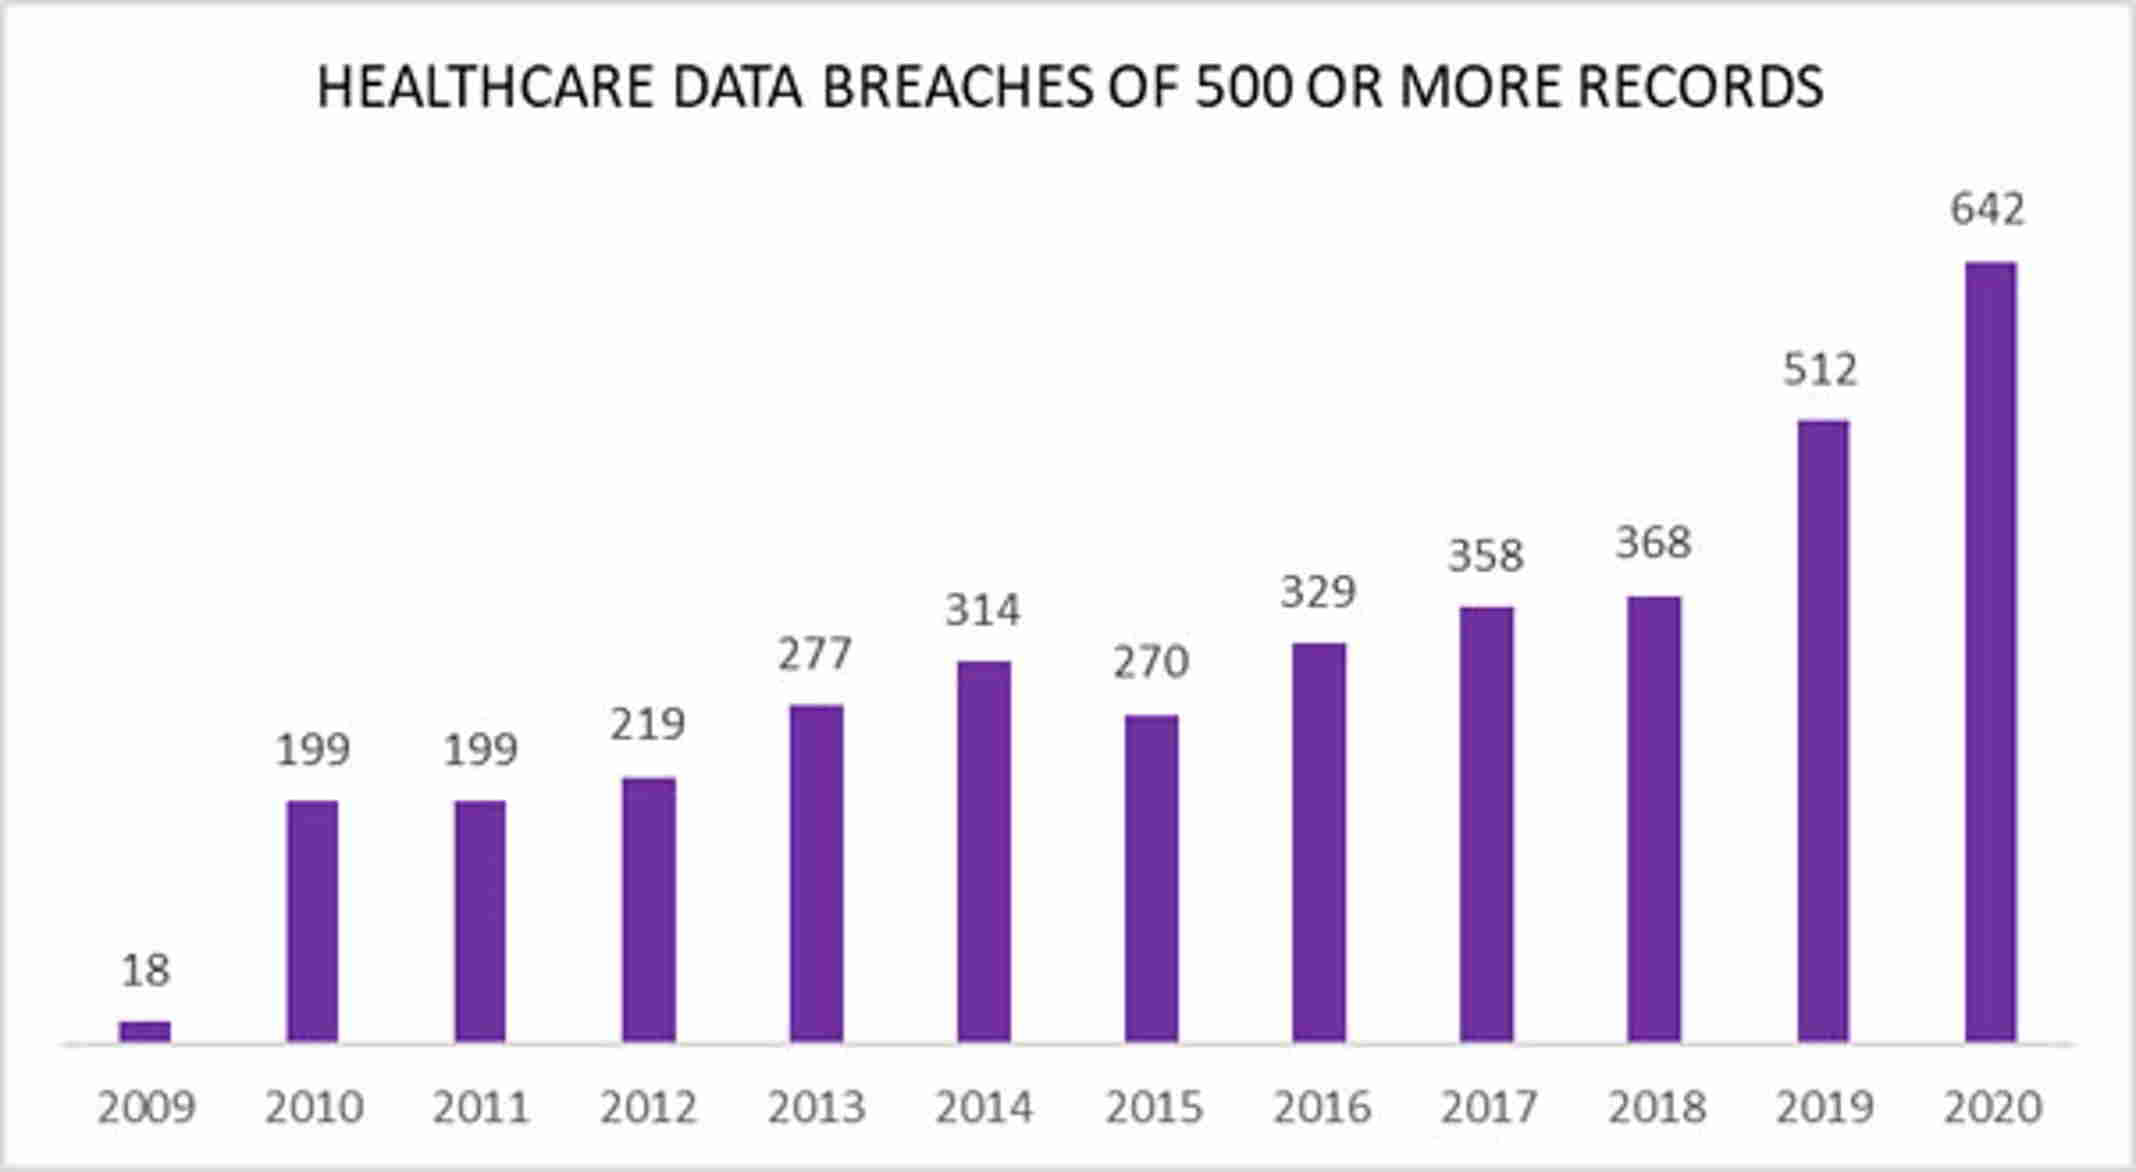 Number of data breaches reported to the US Office for Civil Rights